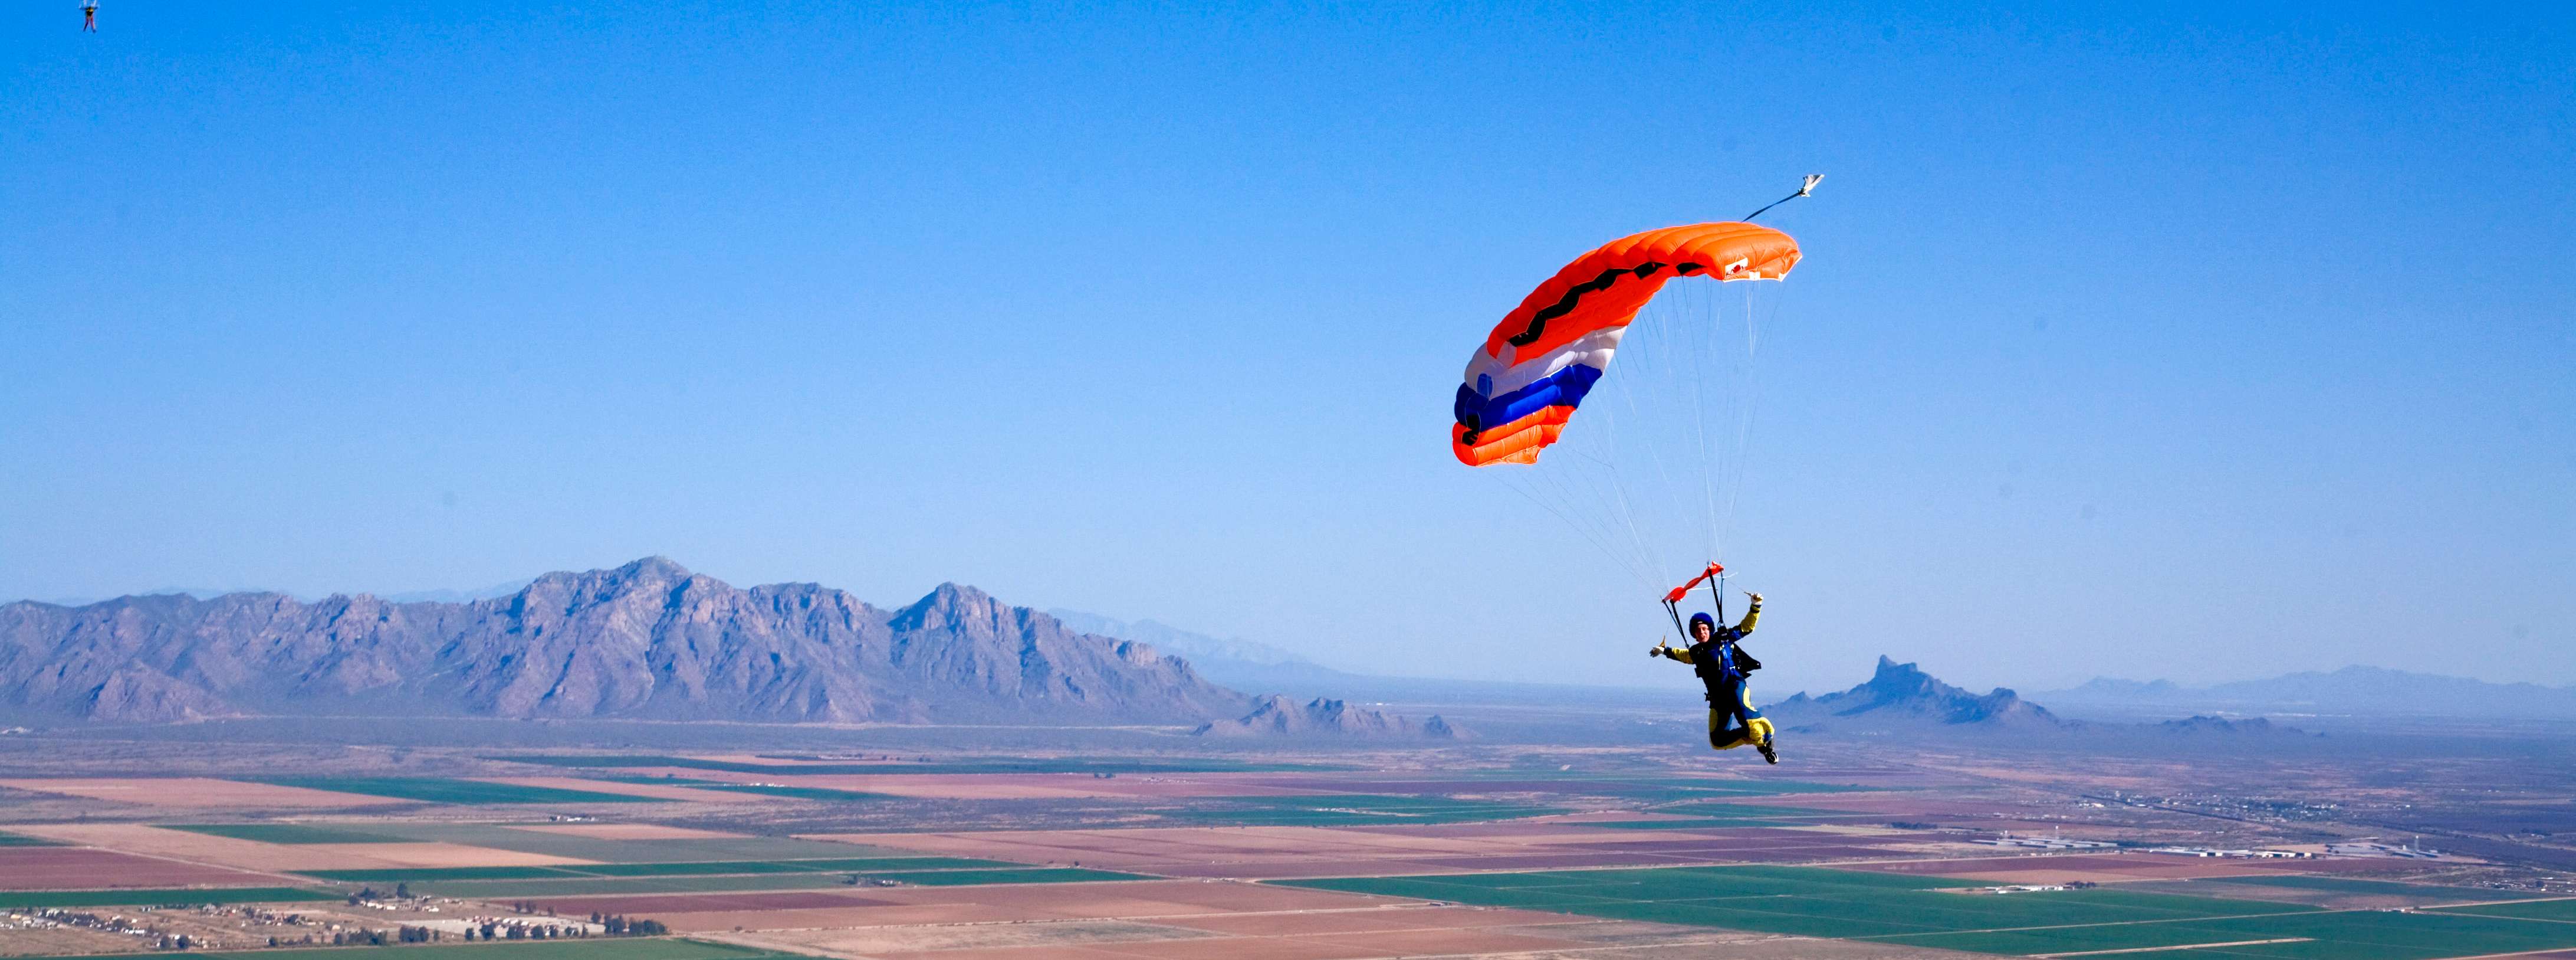 Skydiving Pics, Sports Collection